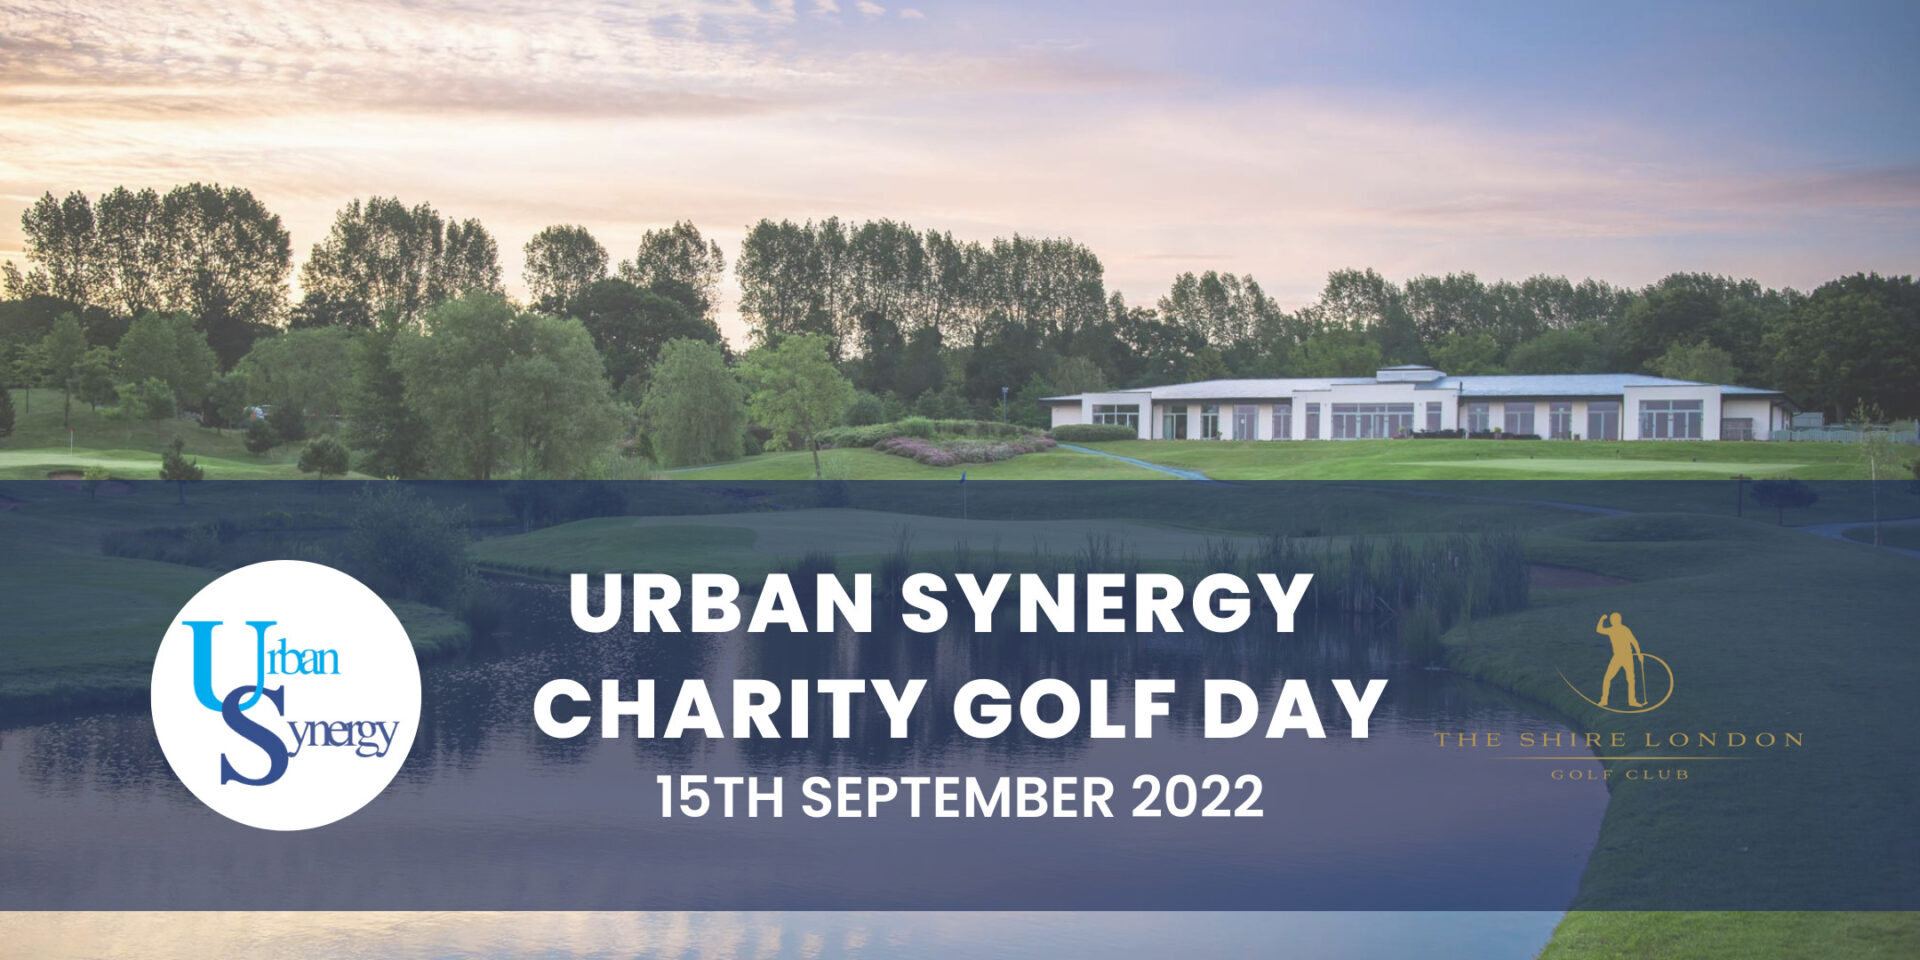 Urban Synergy Charity Golf Day at The Shire London, 15th September 2022